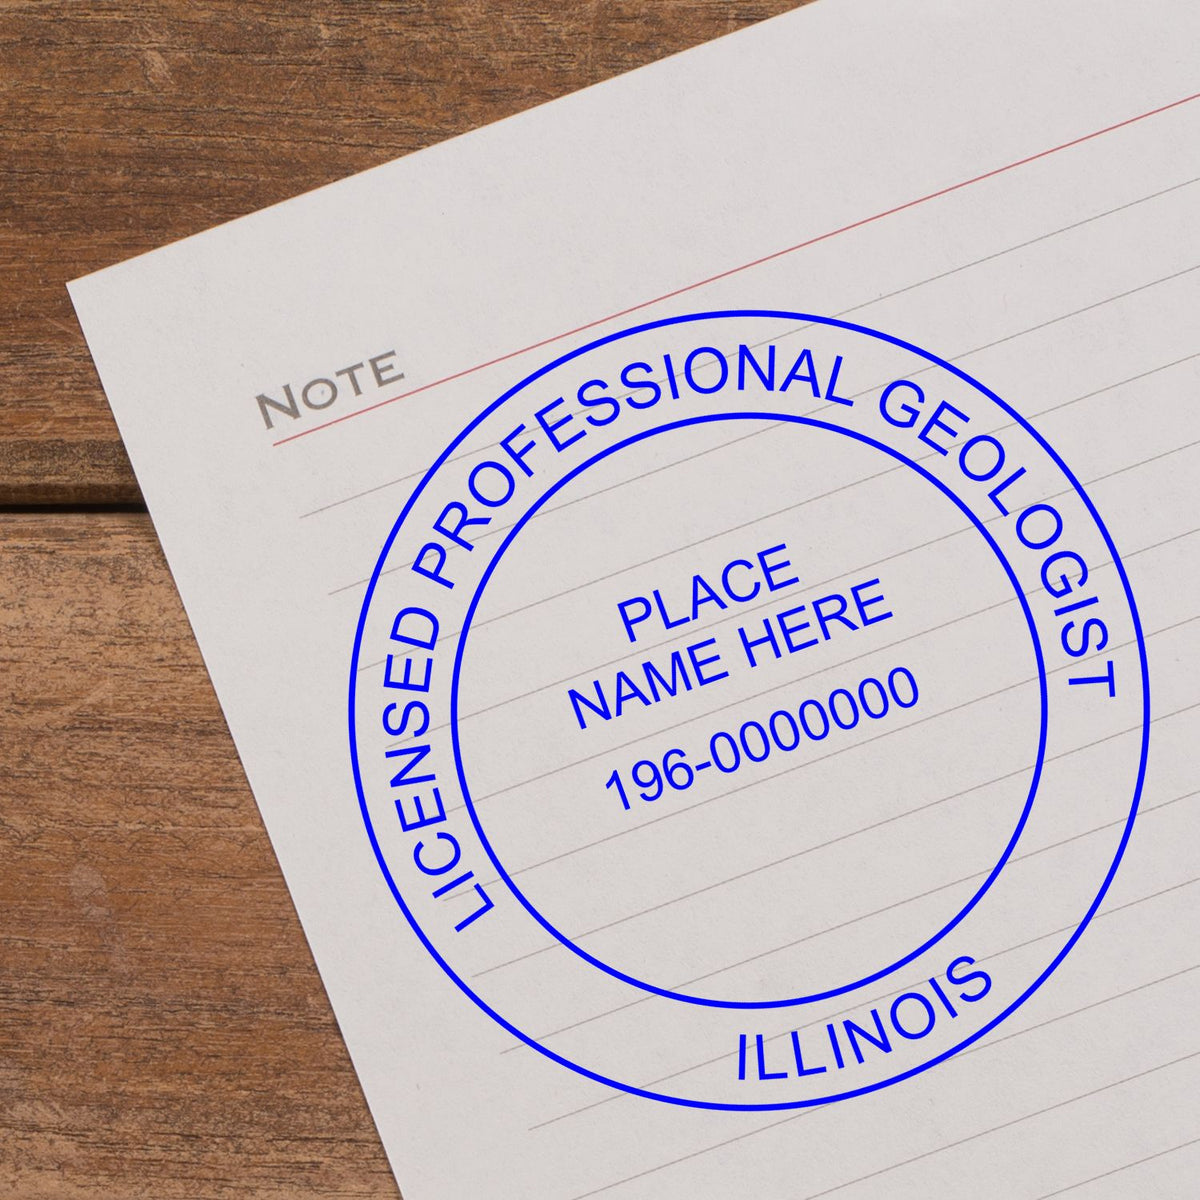 The Slim Pre-Inked Illinois Professional Geologist Seal Stamp  impression comes to life with a crisp, detailed image stamped on paper - showcasing true professional quality.